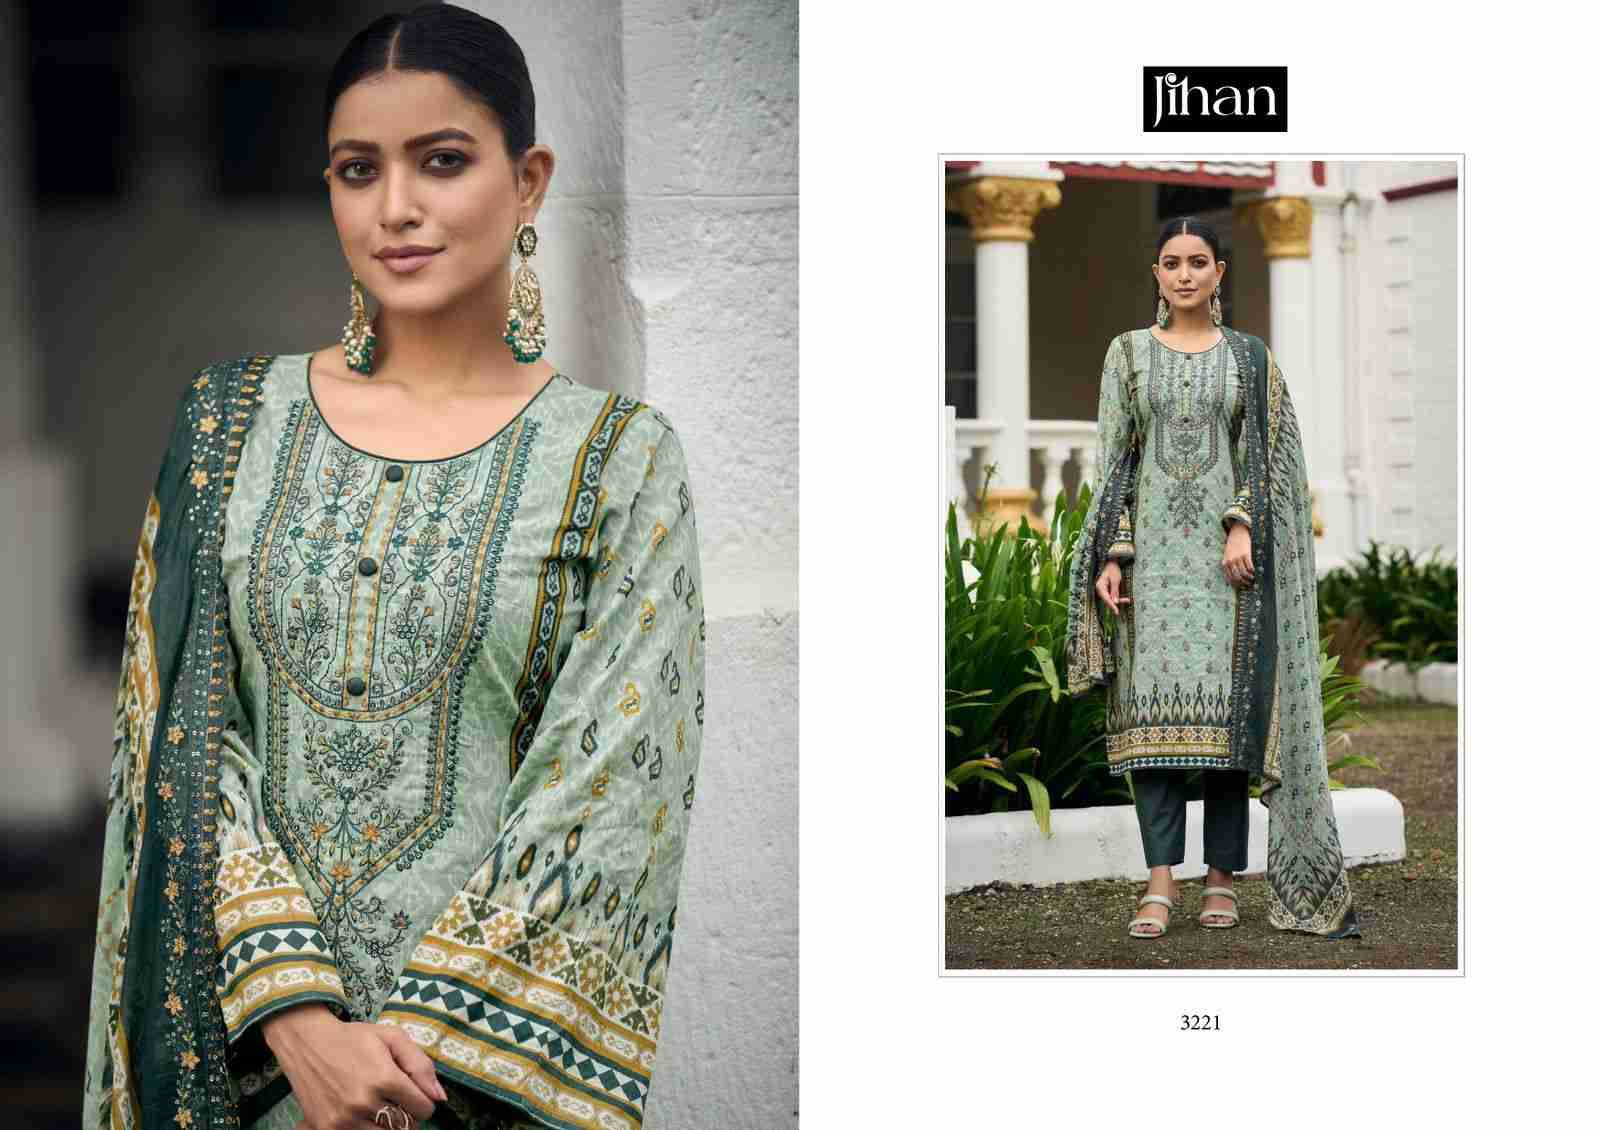 Bin Saeed Vol-6 By Jihan Beautiful Stylish Festive Suits Fancy Colorful Casual Wear & Ethnic Wear & Ready To Wear Pure Lawn Print Dresses At Wholesale Price